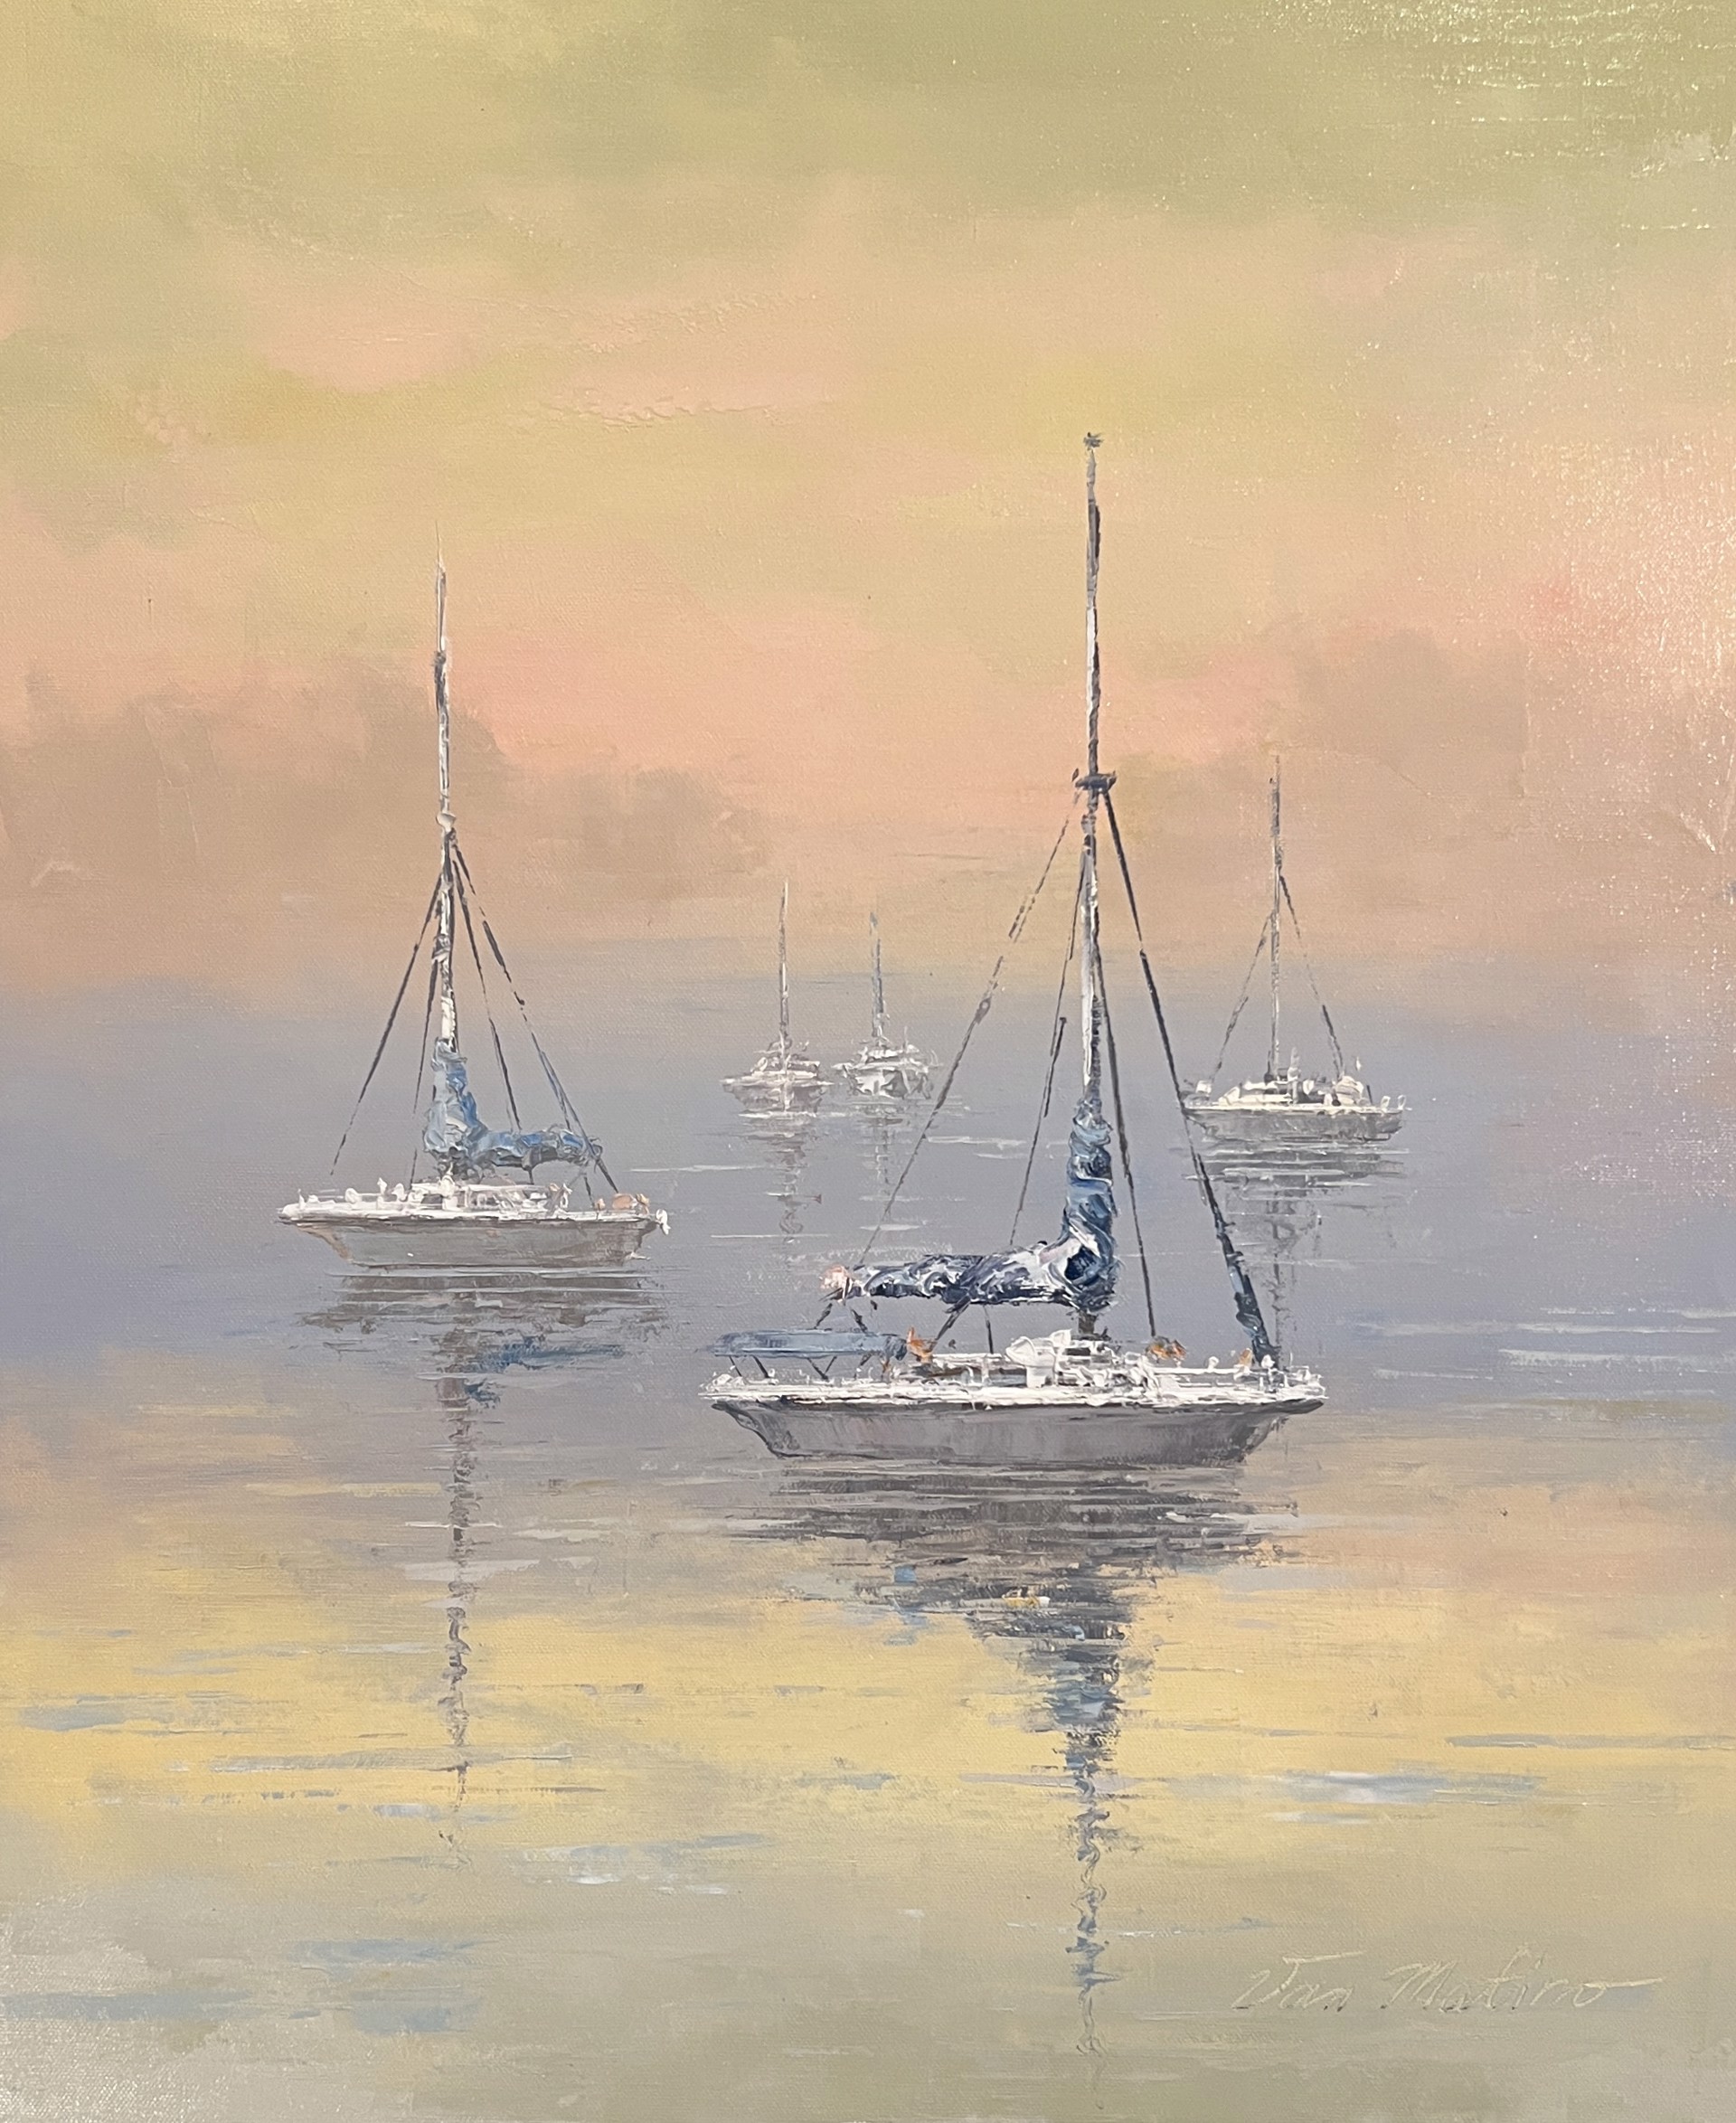 MAGICAL MORNING COLOR IN THE HARBOR by VAN MATINO